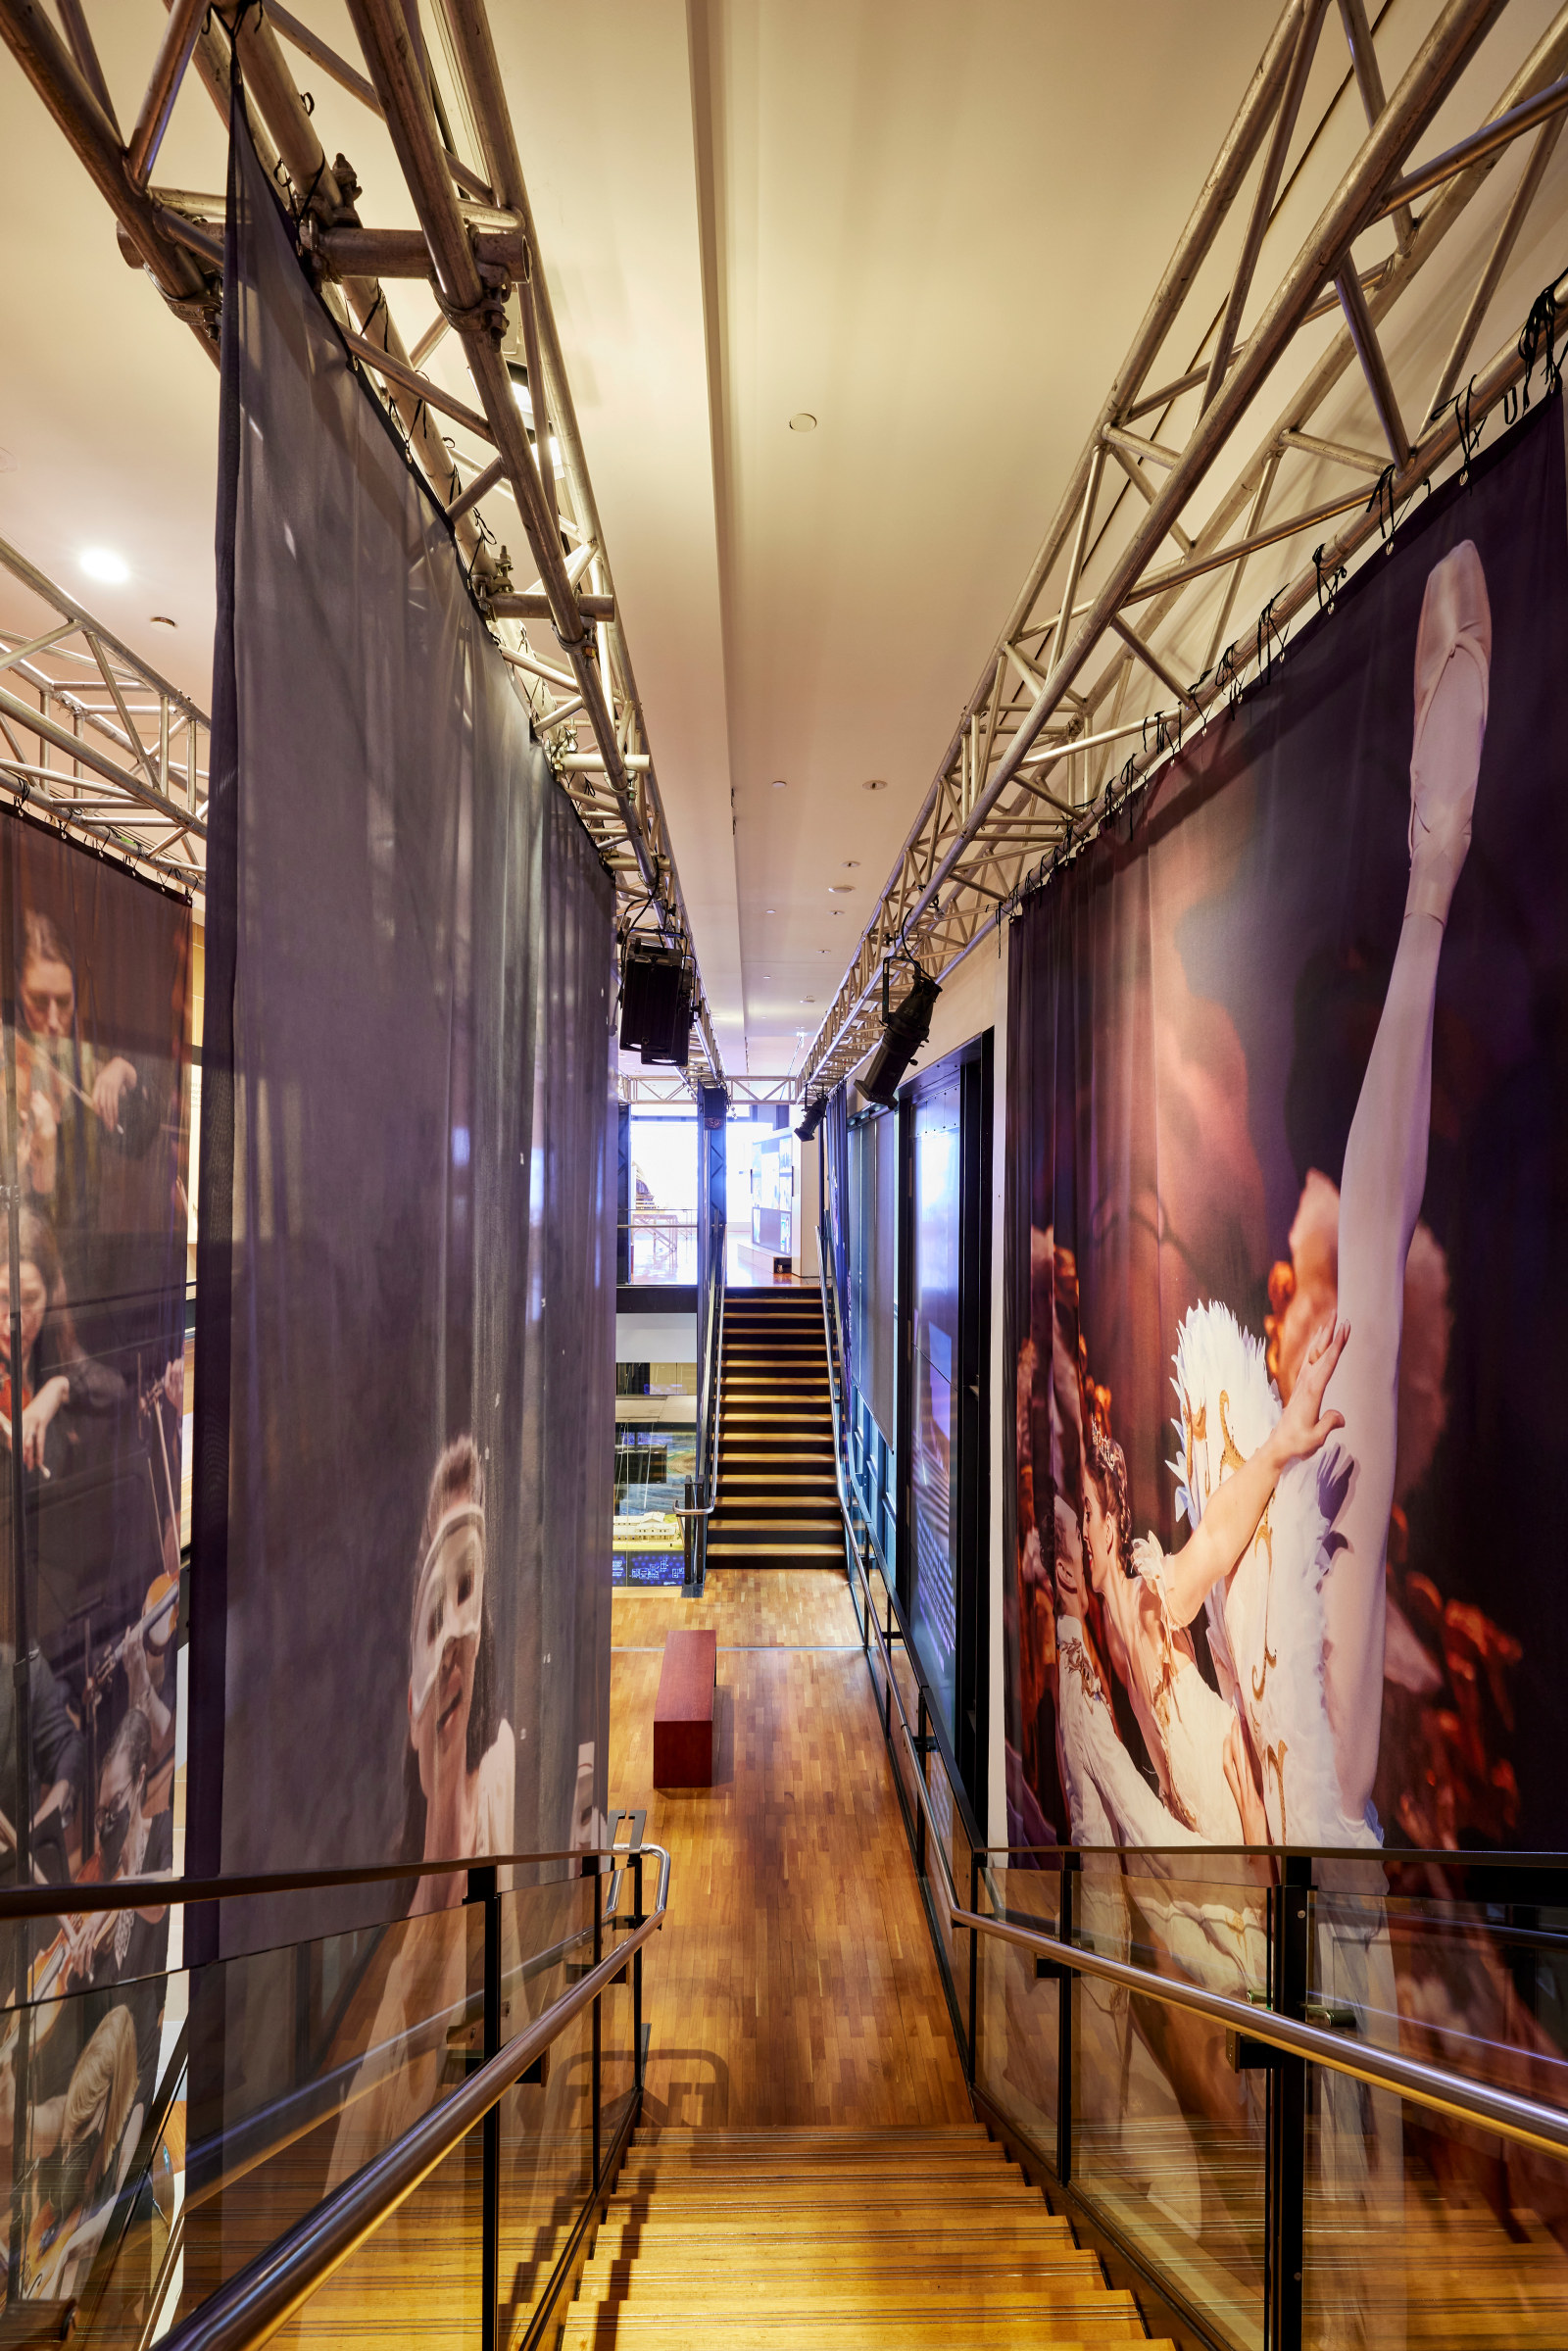 View of the Australian Ballet 'The sleeping beauty (detail)' [right] and the Opera Australia 'Mariana Hong in Falstaff (detail) ' [left] stairwell banners - The People's House marketing & installation photoshoot